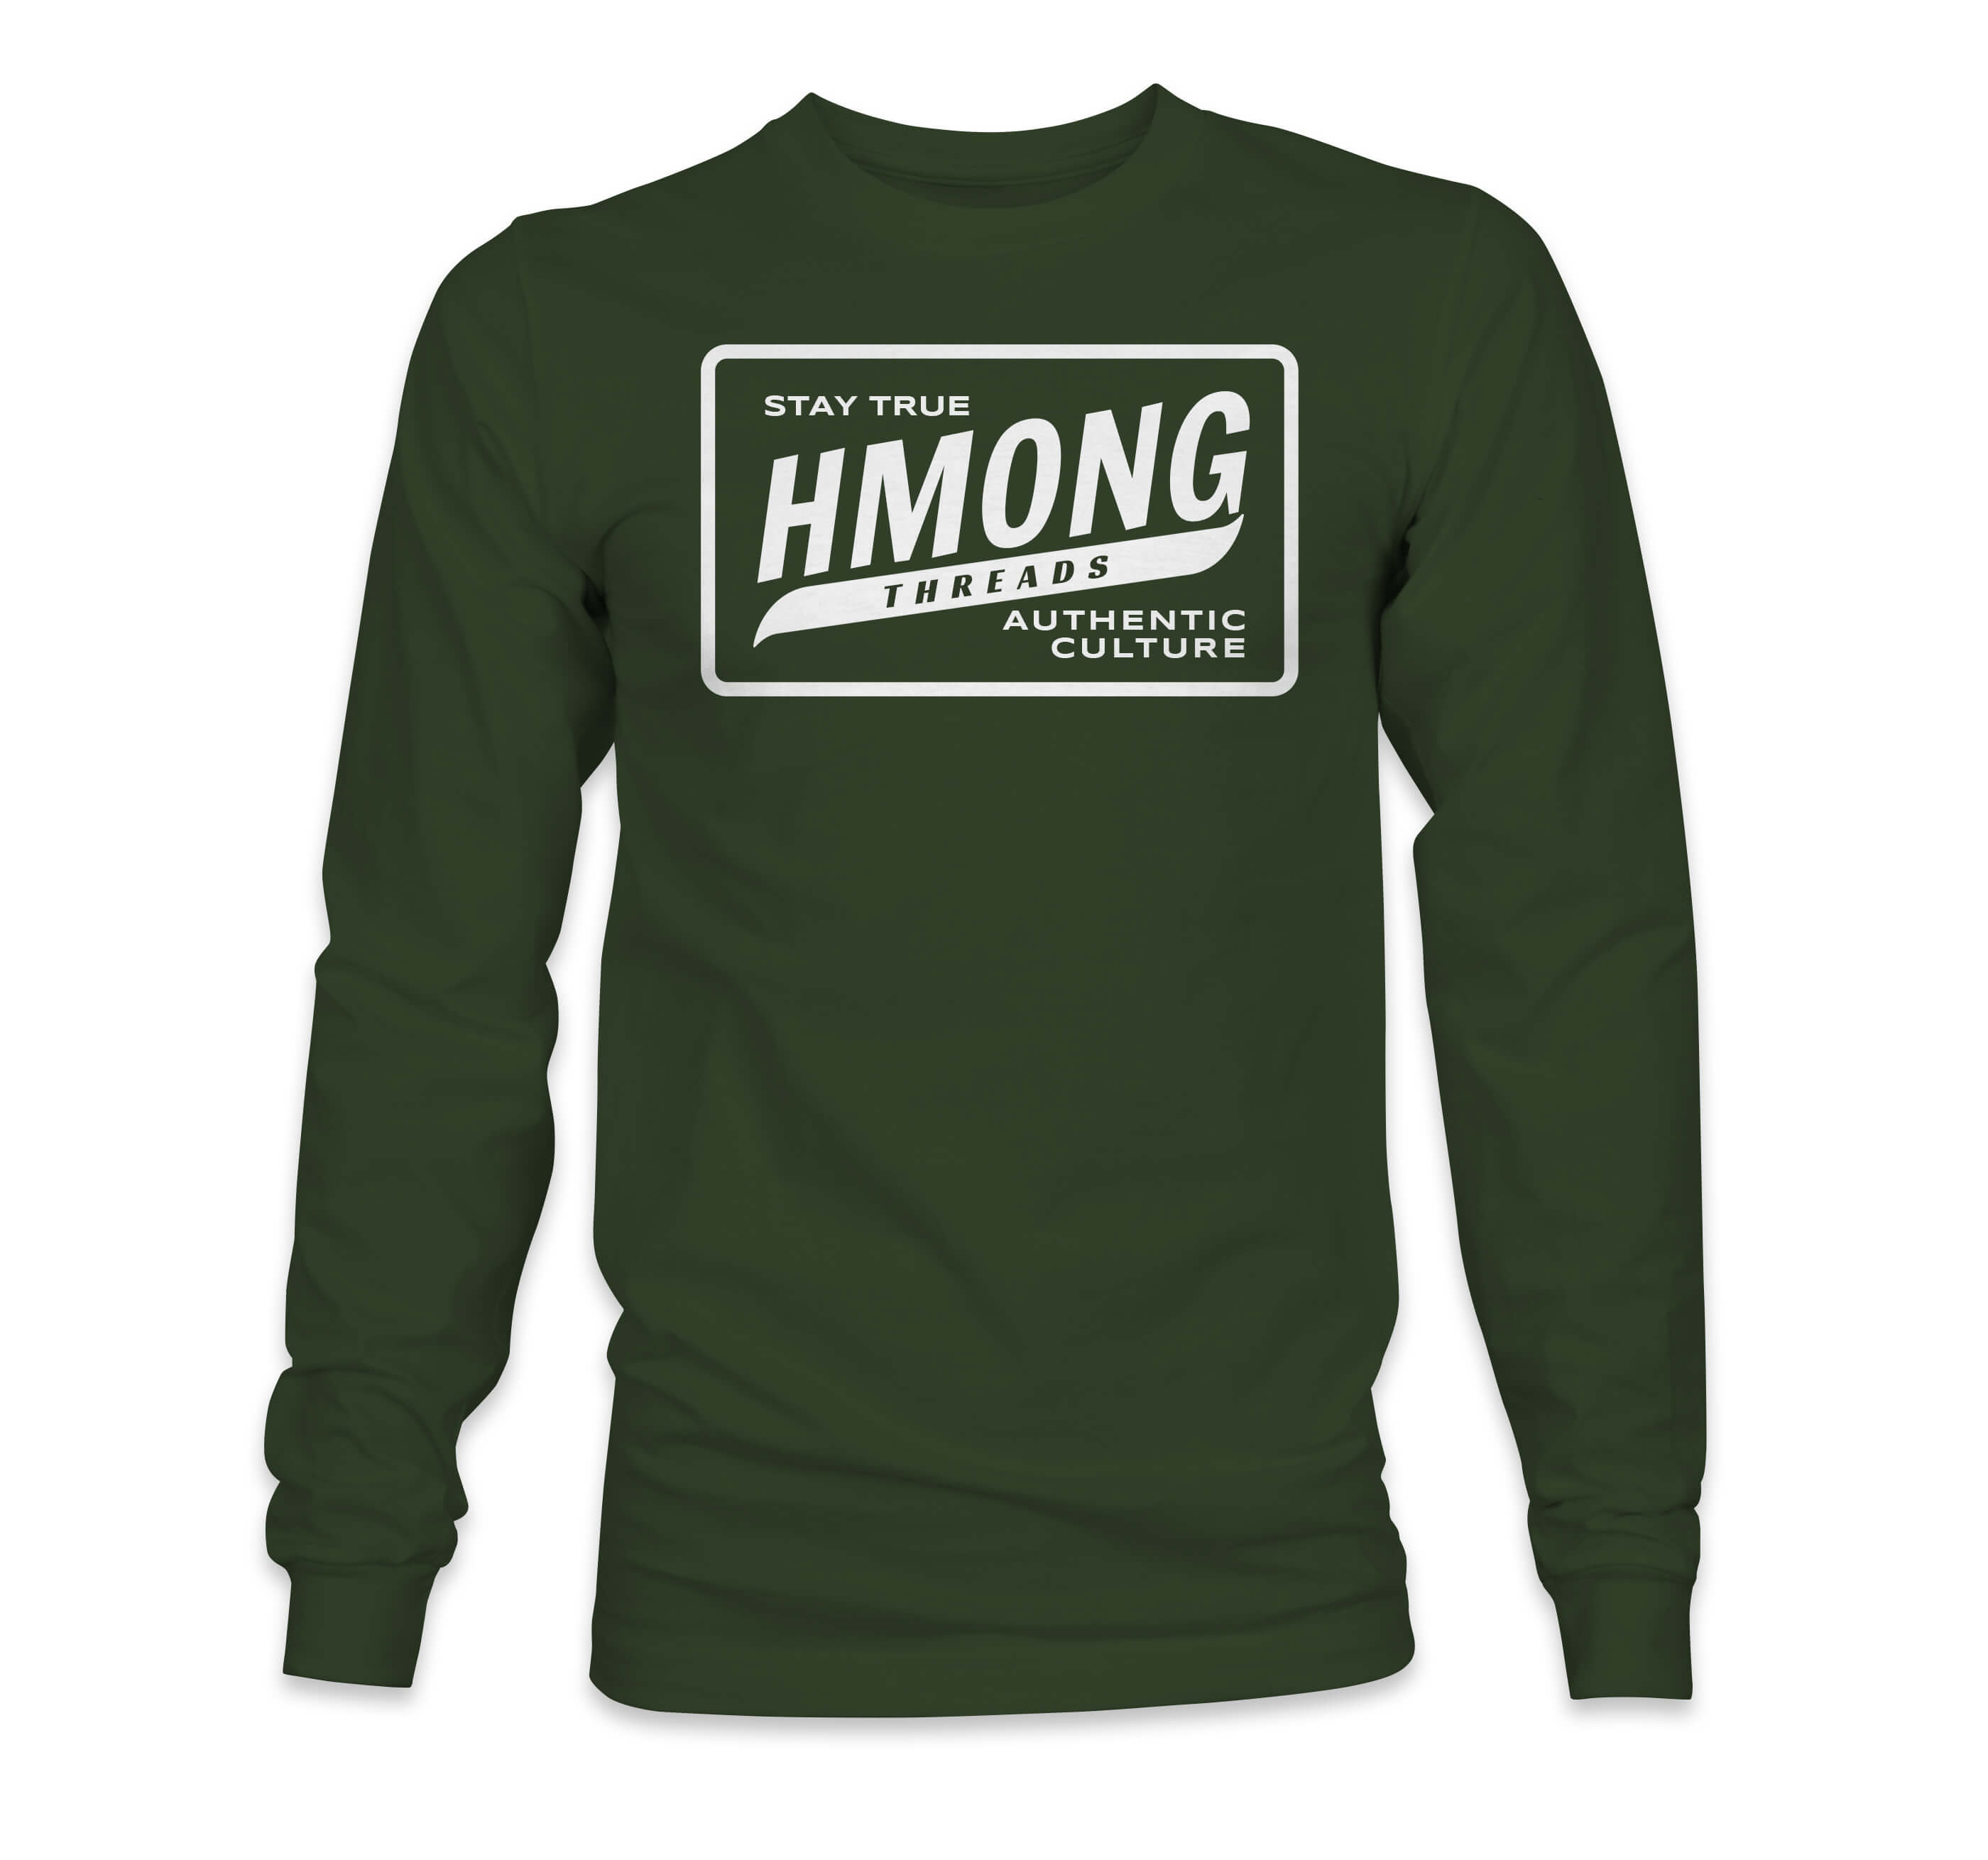 Hmong Threads Stay True Long Sleeves T-shirt – Forest Green